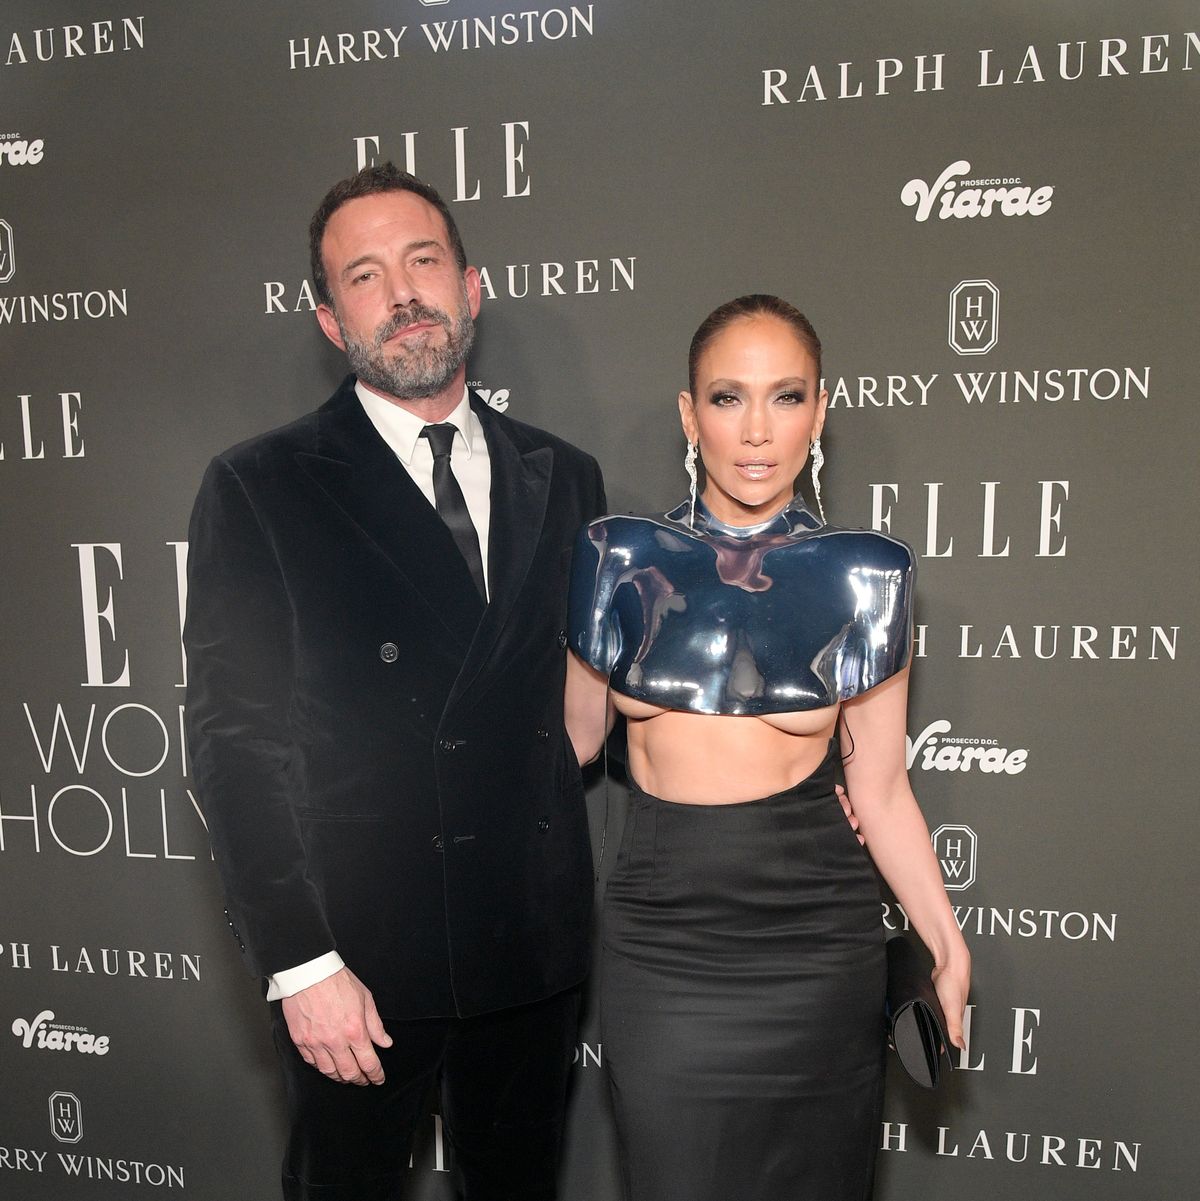 J.Lo Wears Cropped Breast Plate With Underboob on Red Carpet